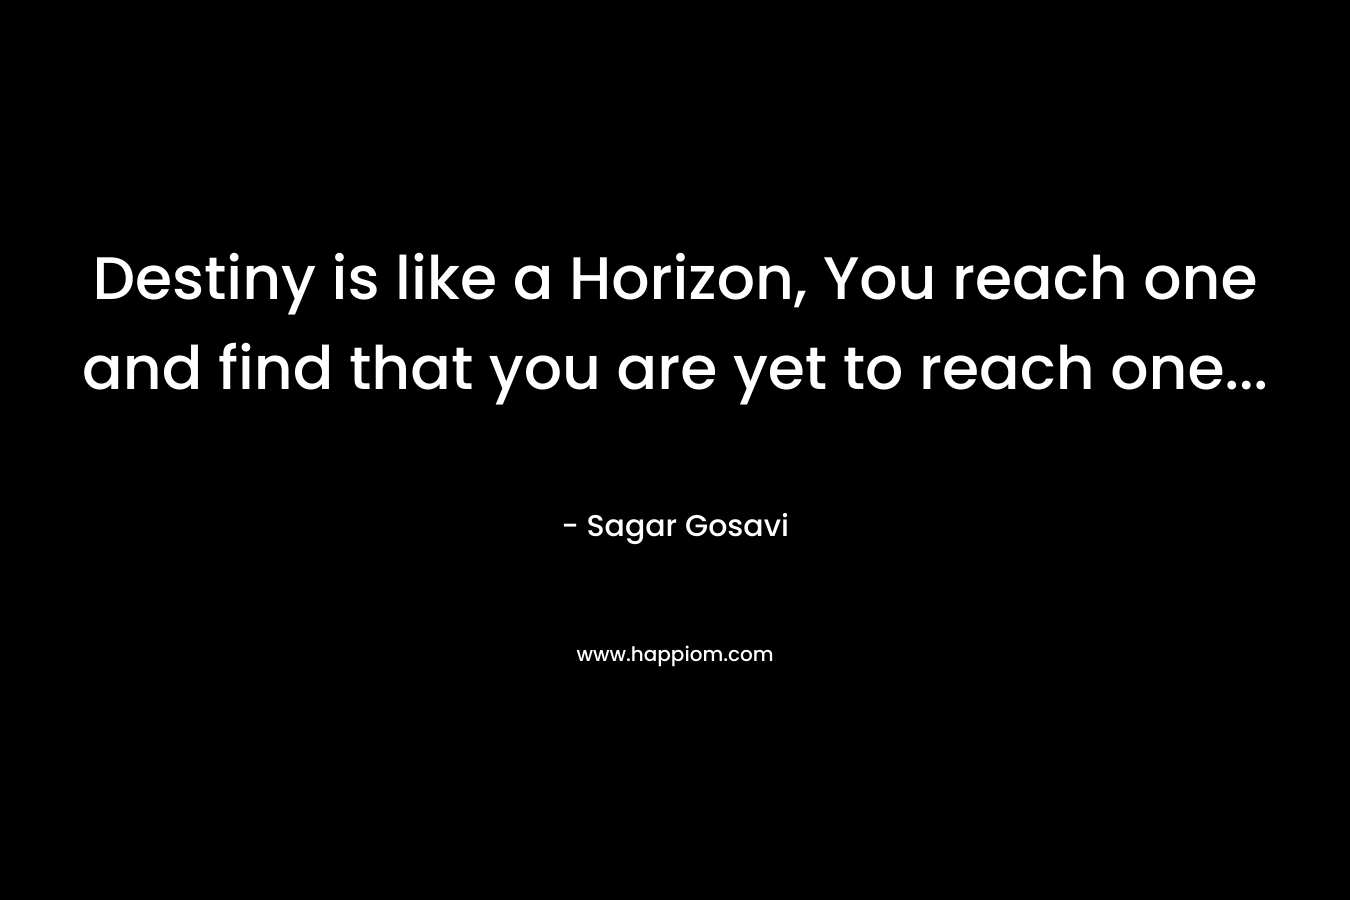 Destiny is like a Horizon, You reach one and find that you are yet to reach one… – Sagar Gosavi